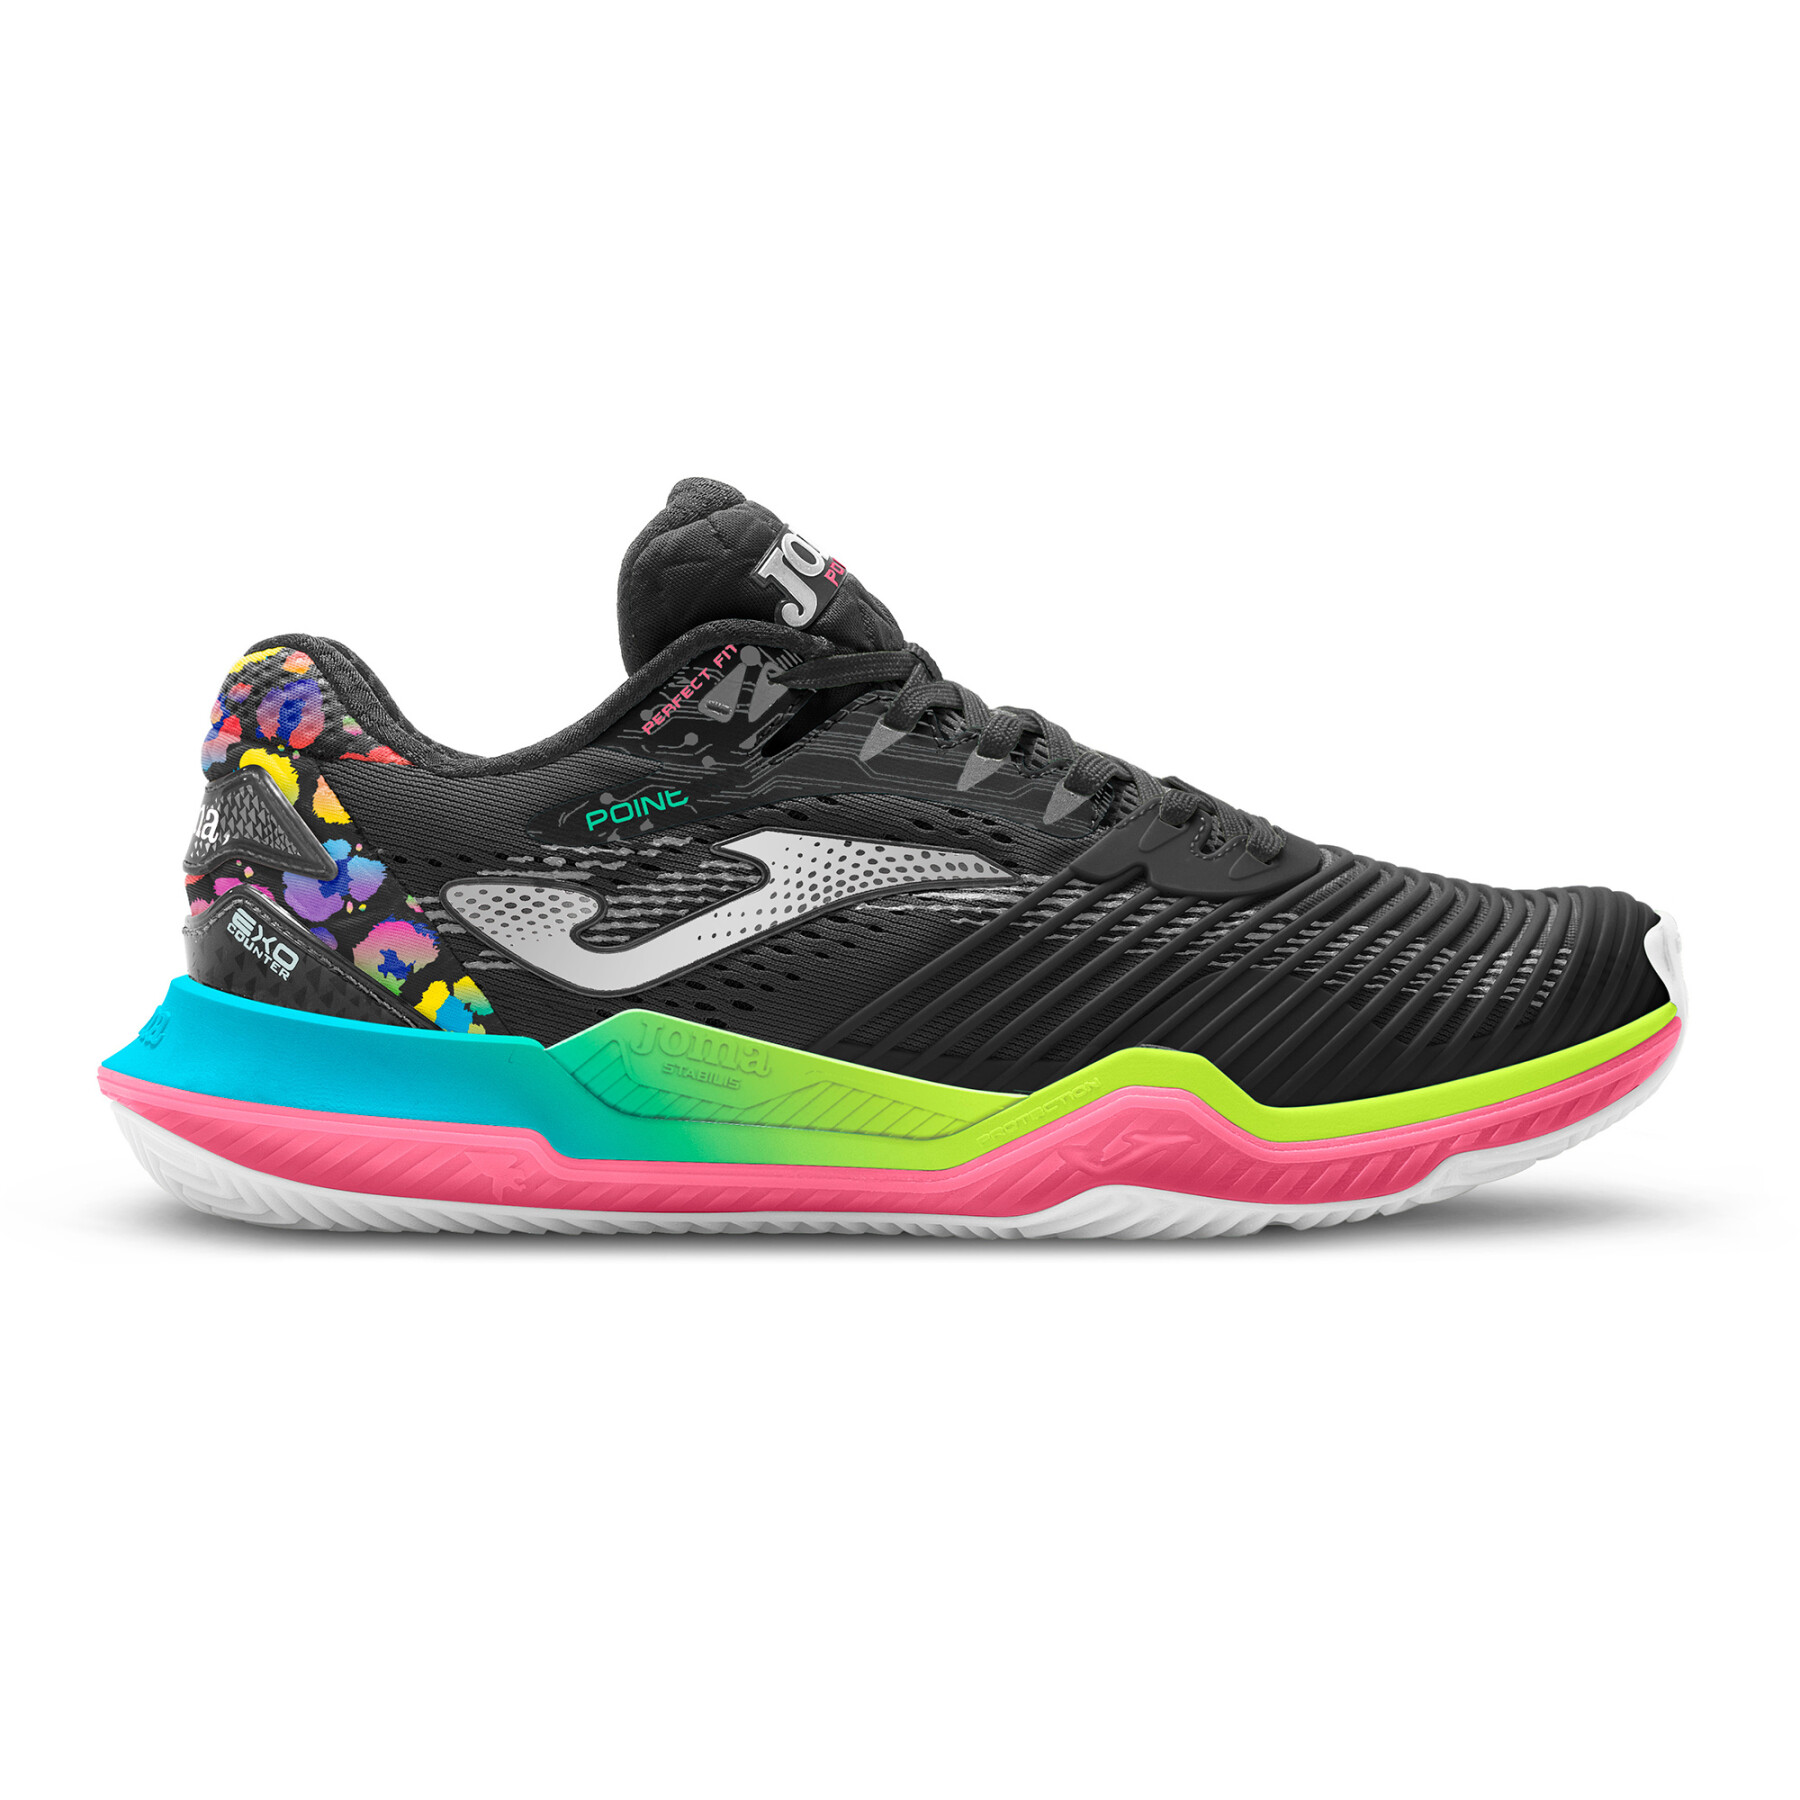 Women's tennis shoes Joma Point Lady 2301